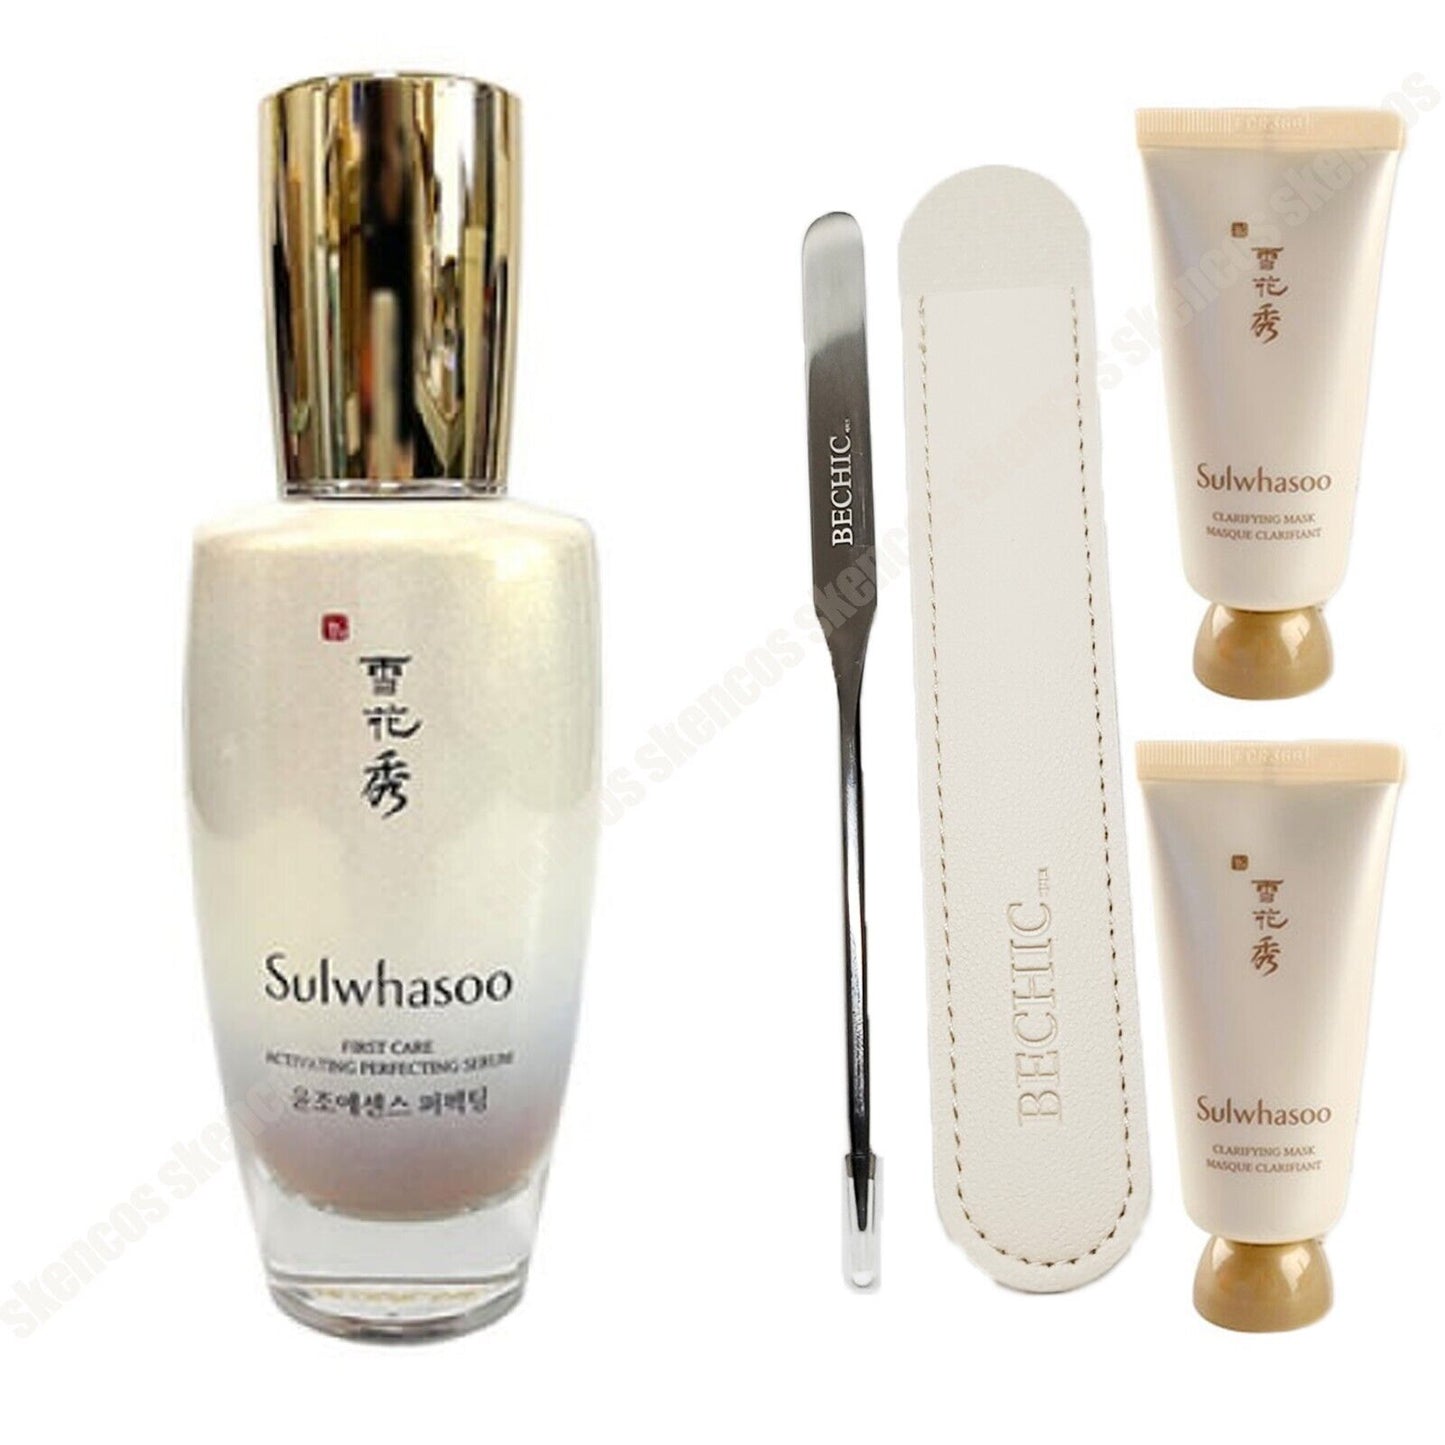 Sulwhasoo First Care Activating Perfecting Serum 3 oz+Peel Off Mask 2EA+Spachula